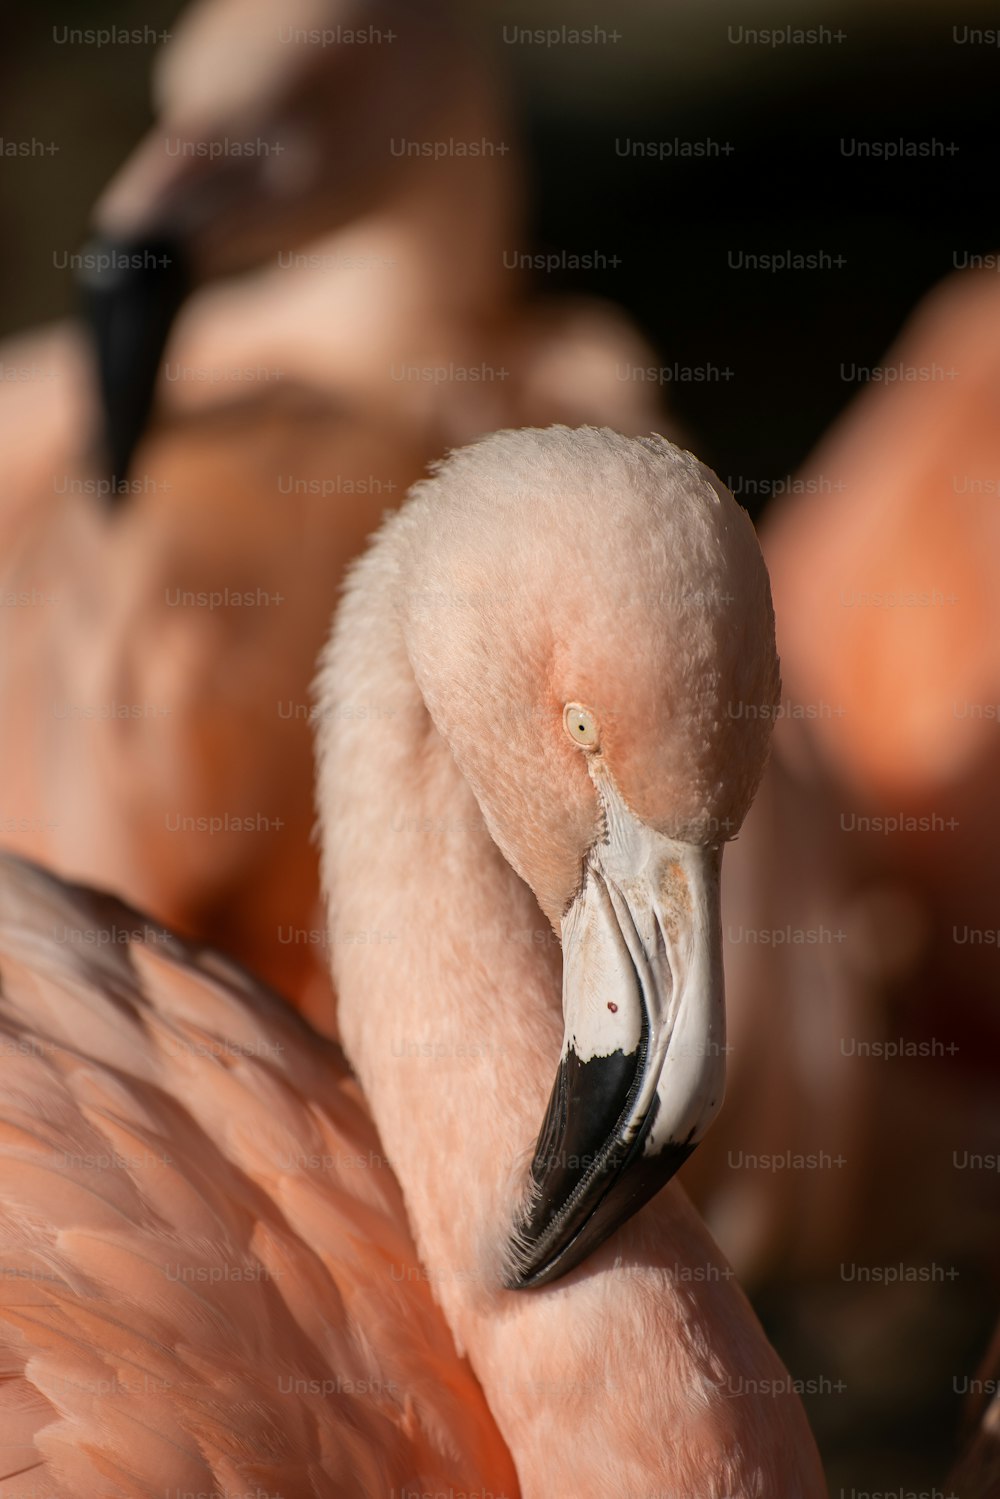 a close up of a flamingo with other flamingos in the background